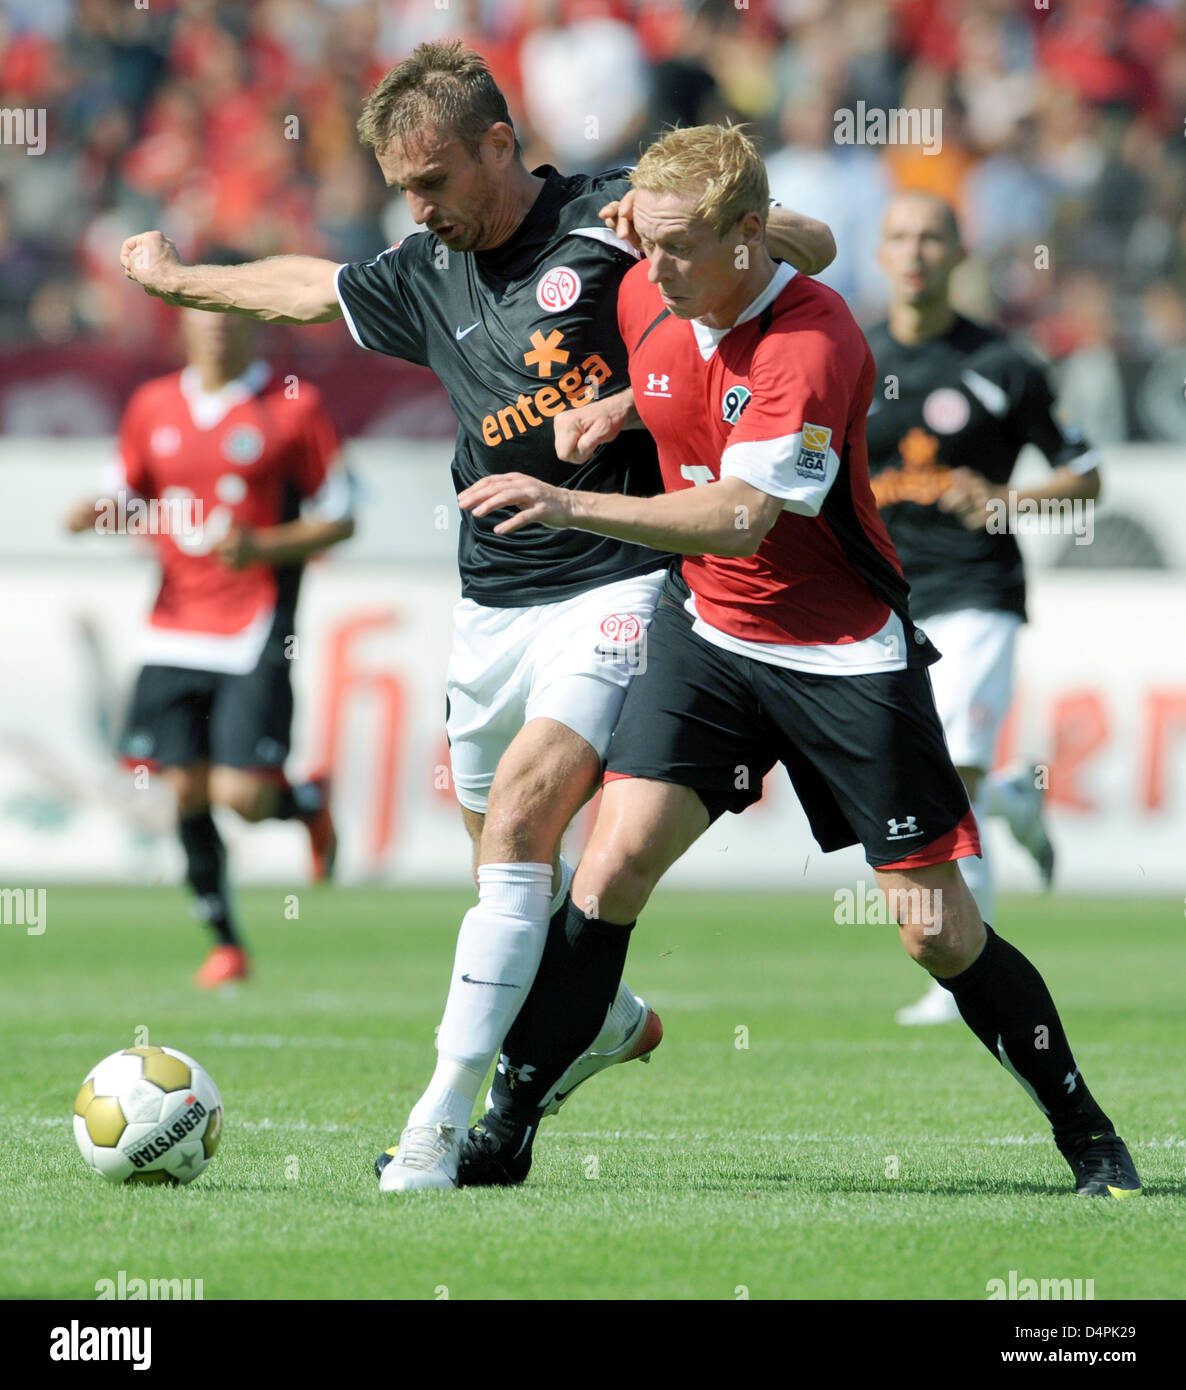 Mainz Milorad Pekovic (L) and Hanover?s Mikael Forssell (R) for the ball during the German Bundesliga match Hanover 96 v FSV 05 AWD Arena stadium of Germany, 15